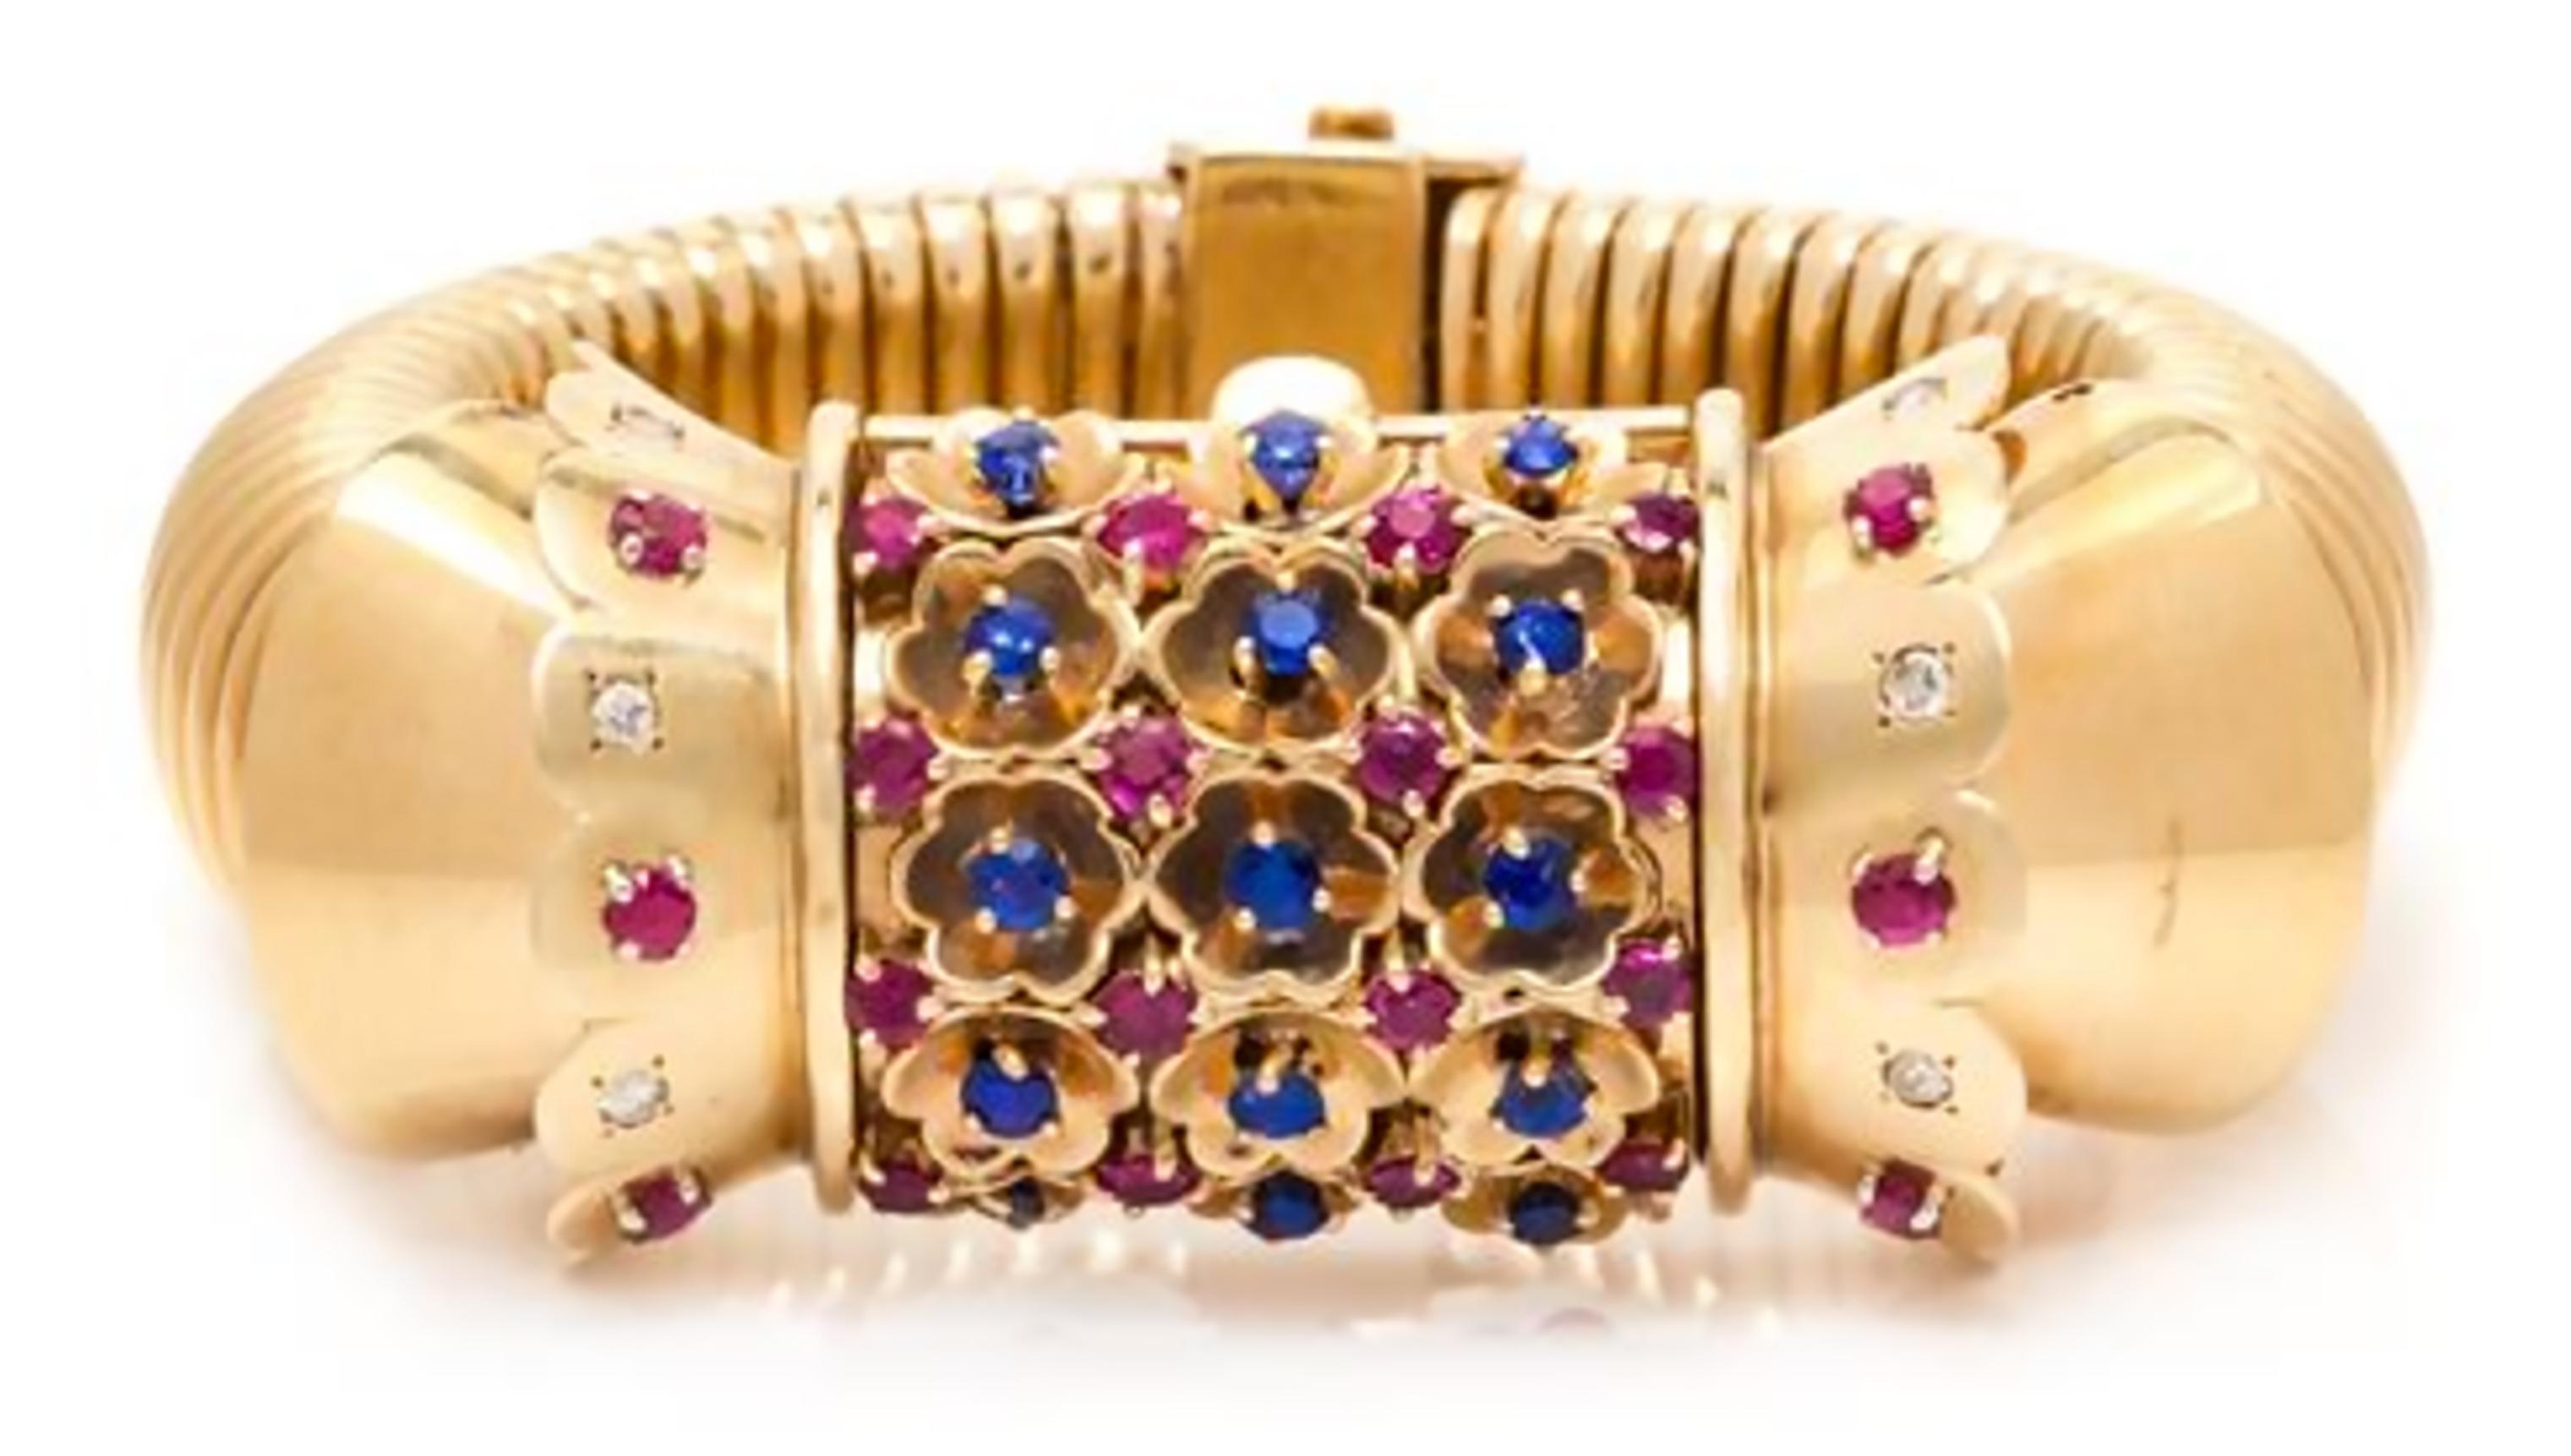 A Retro Rose Gold, Ruby, Sapphire and Diamond Surprise Watch- Bracelet, John Rubel for Cartier, circa 1950s. The hinged dial cover containing 15 round mixed cut sapphires measuring approximately 2.80 mm in diameter, 22 round mixed cut rubies